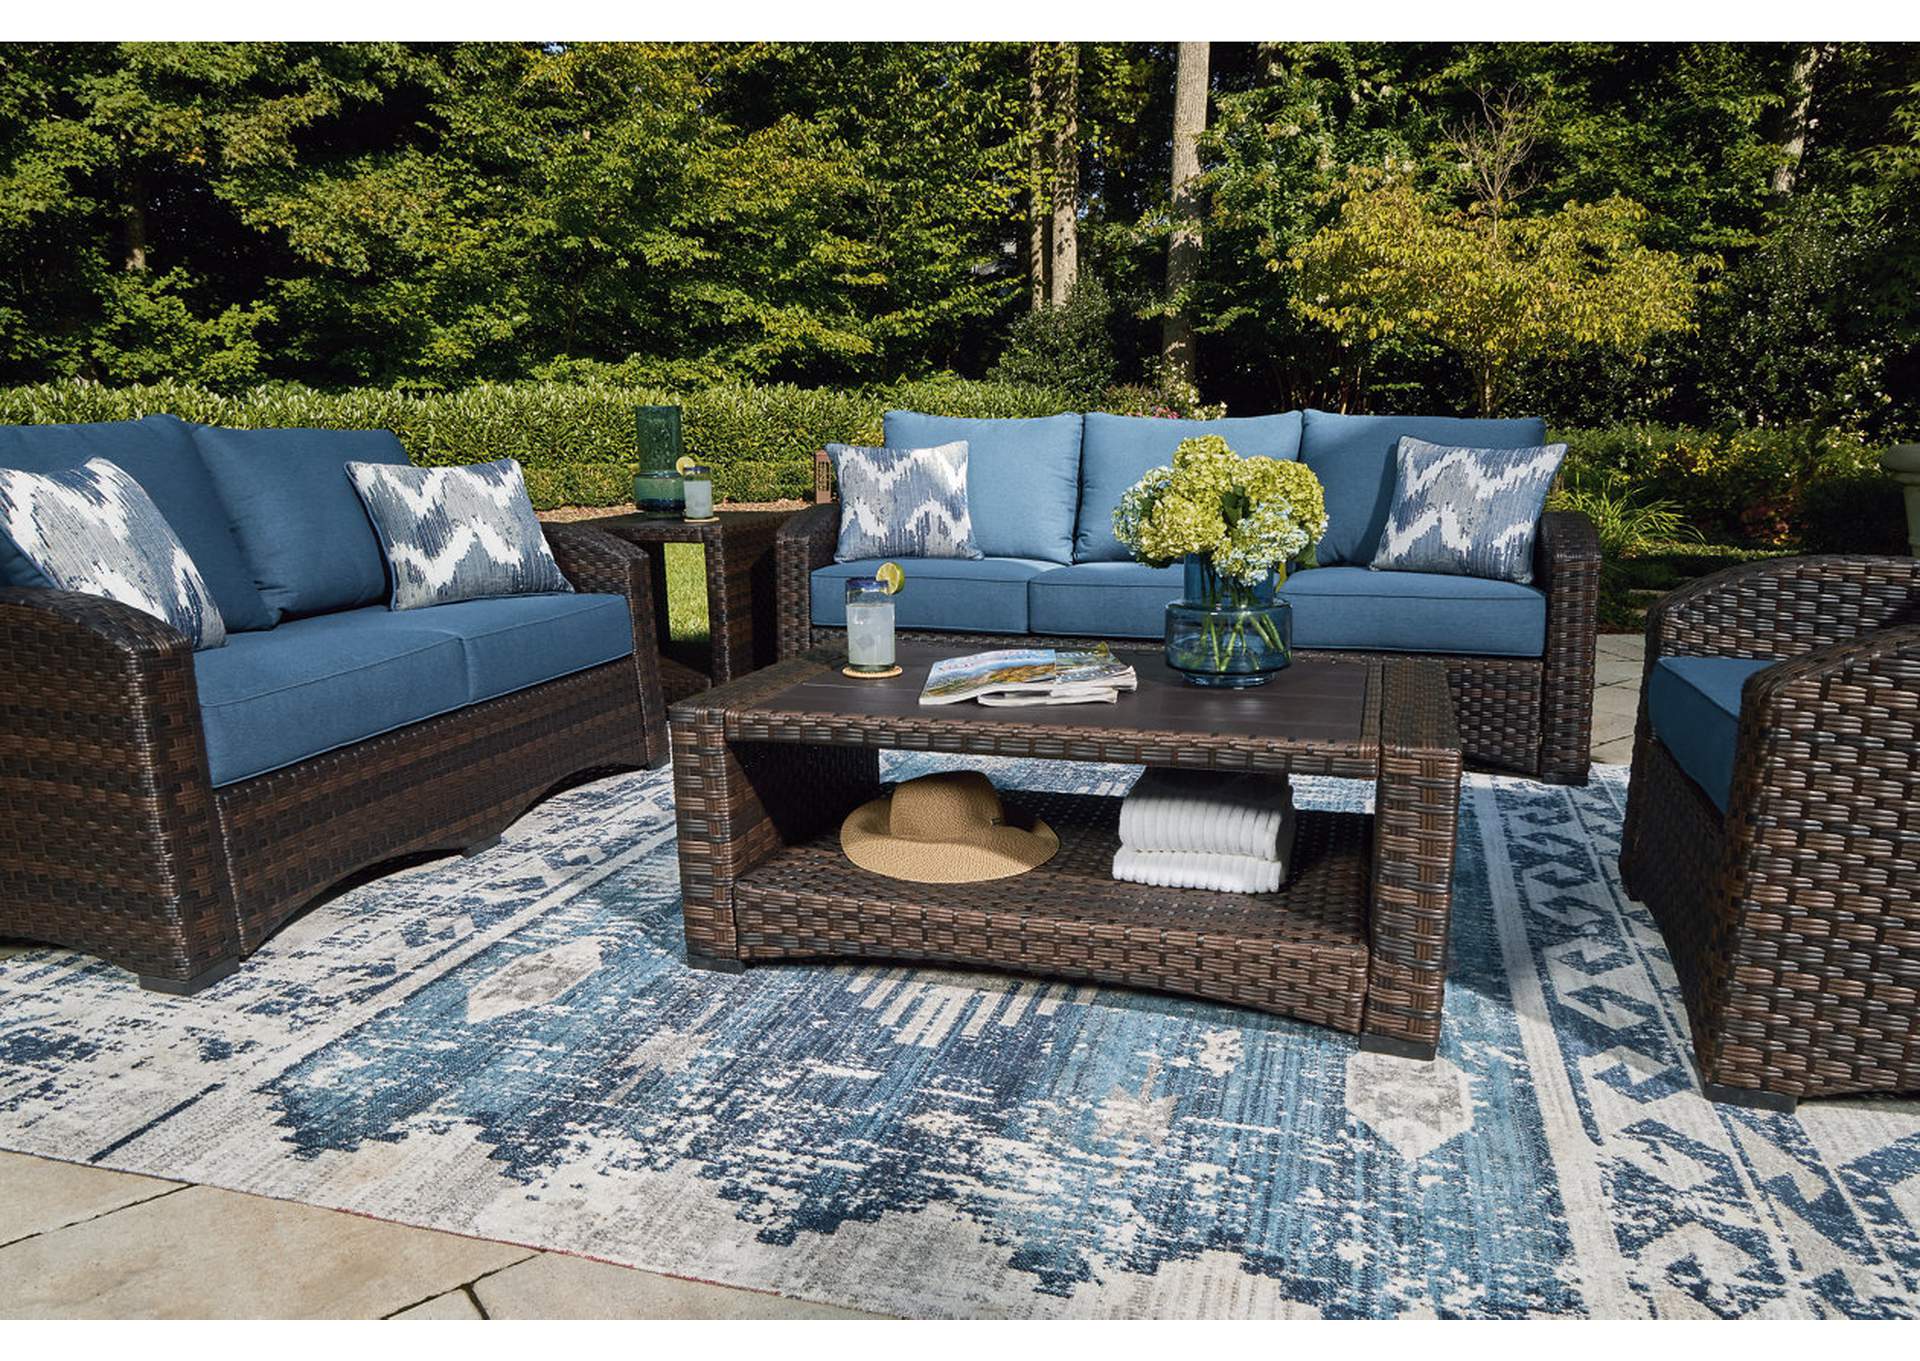 Windglow Outdoor Loveseat with Cushion,Outdoor By Ashley